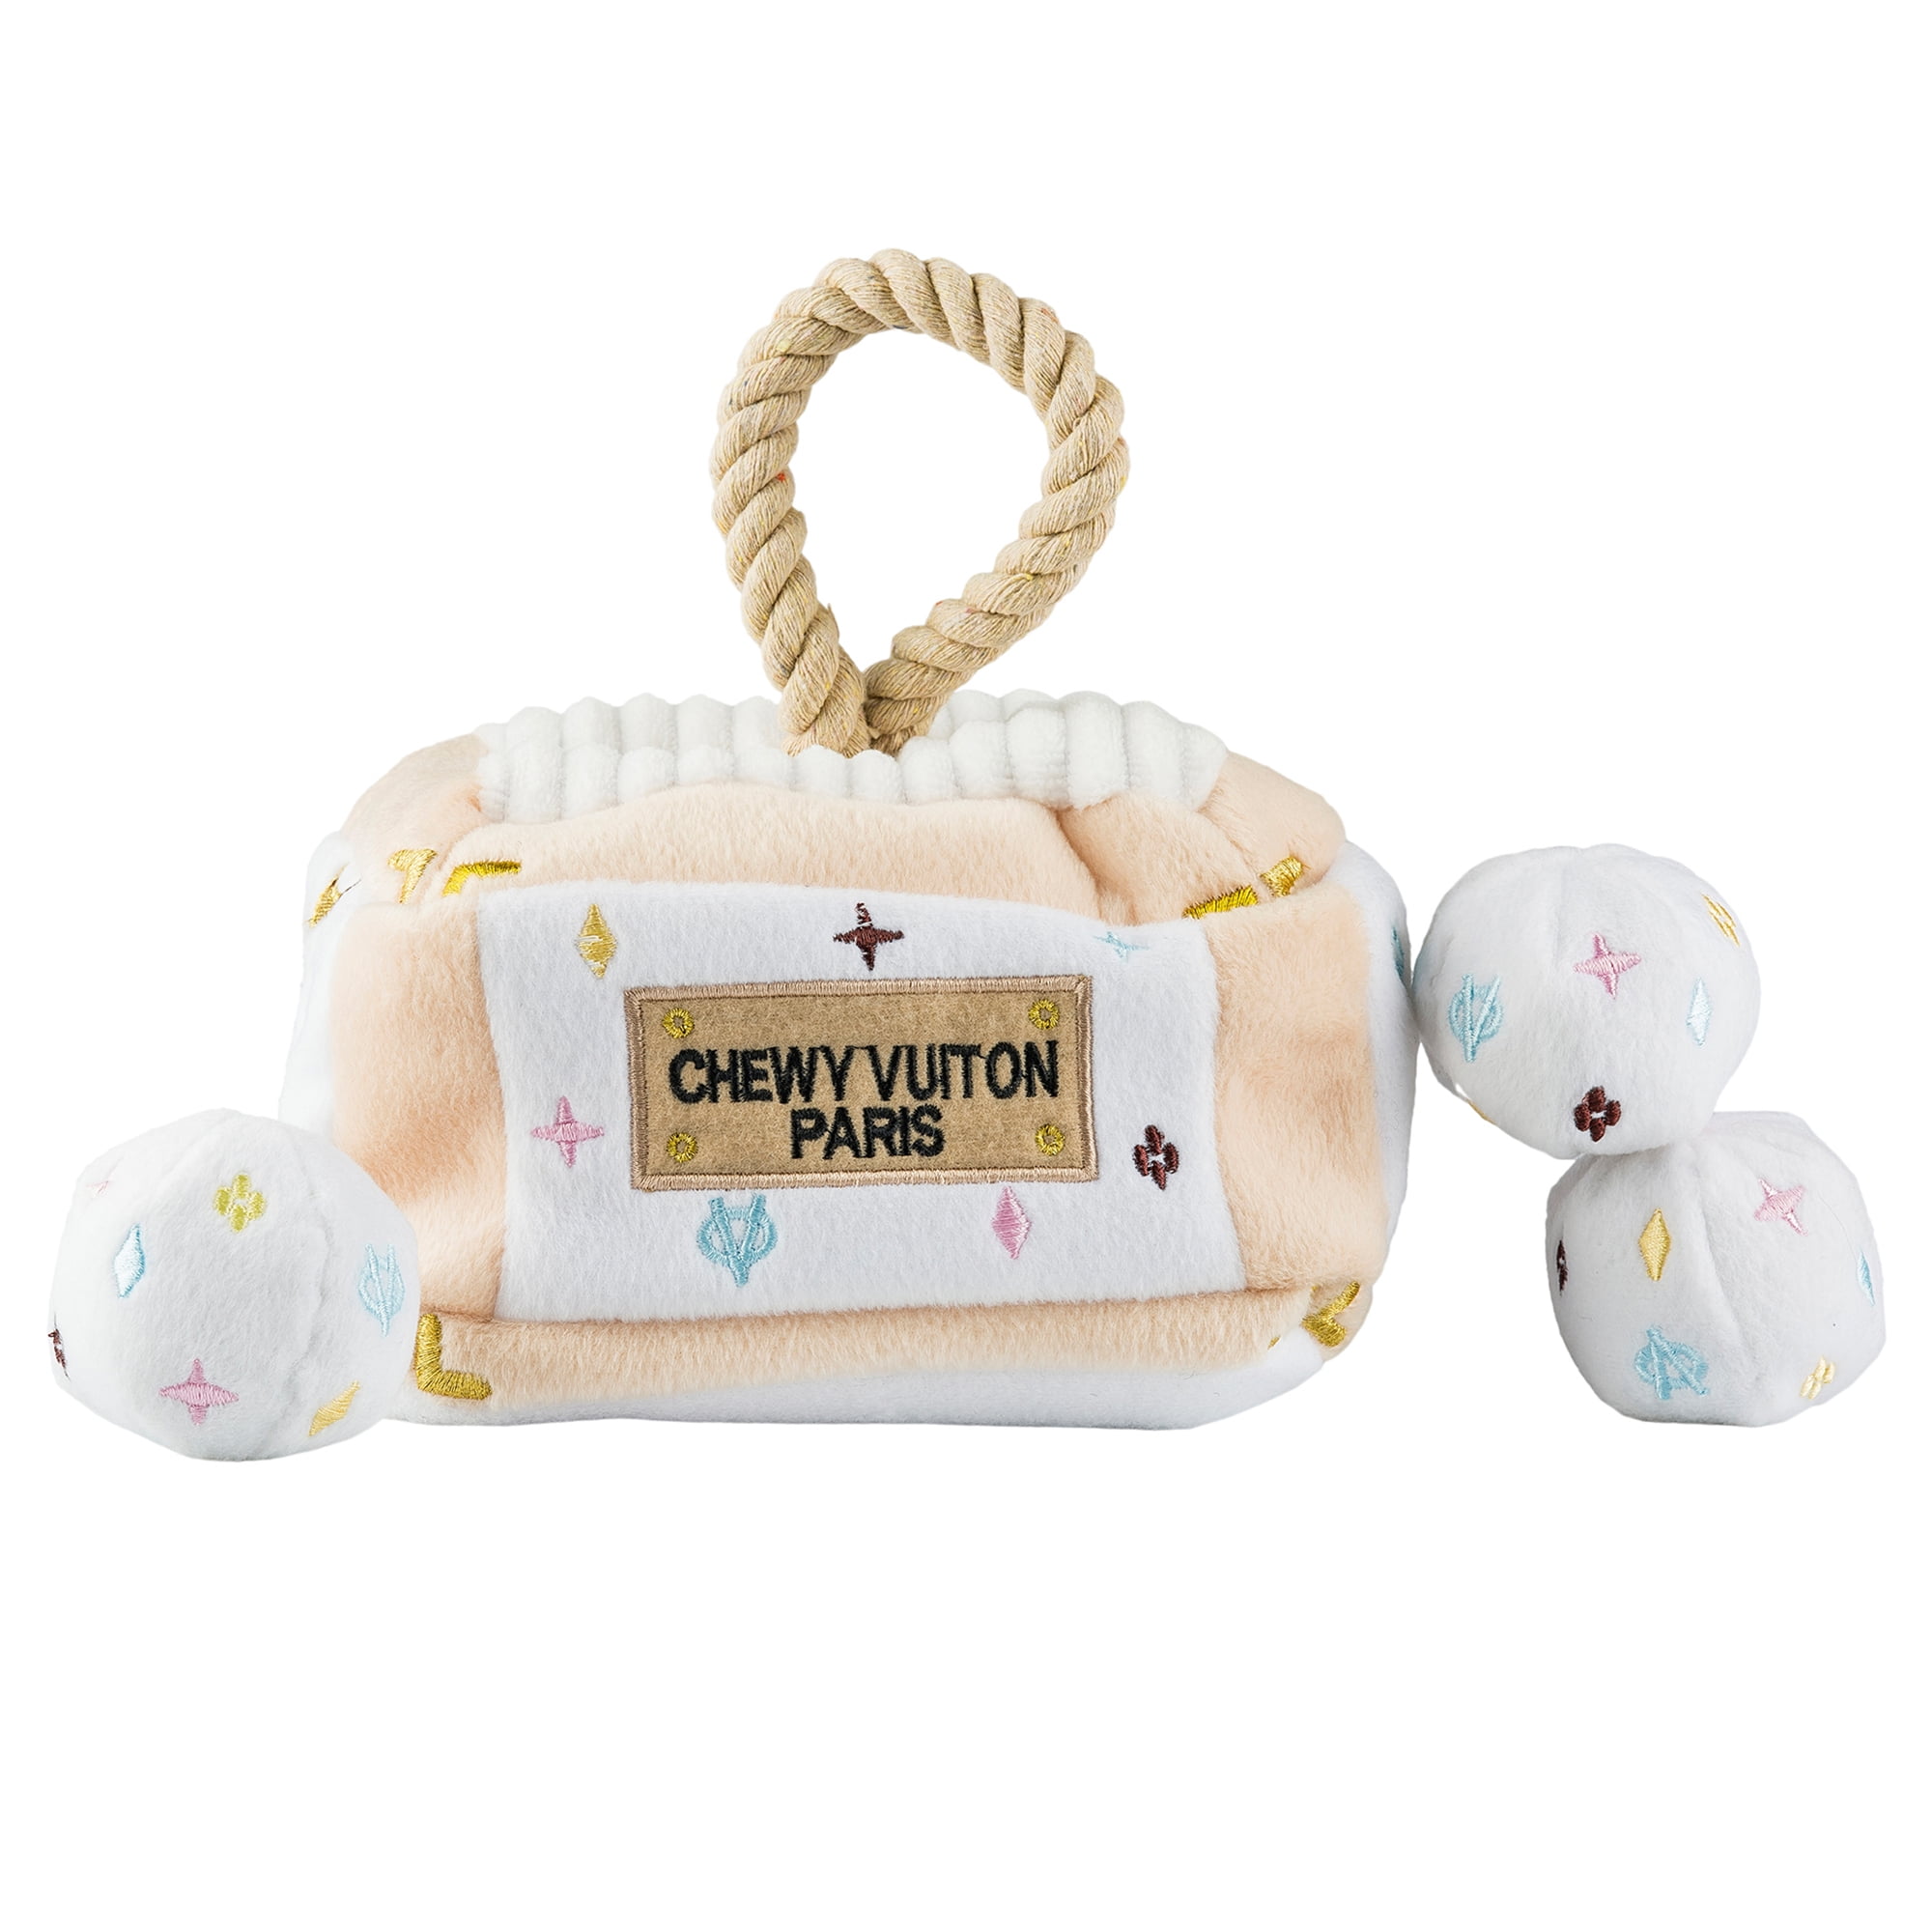 Haute Diggity Dog Chewy Vuiton White Collection – Soft Plush Designer Dog  Toys with Squeaker and Fun, Unique, Parody Designs from Safe,  Machine-Washable Materials for All Breeds & Sizes 